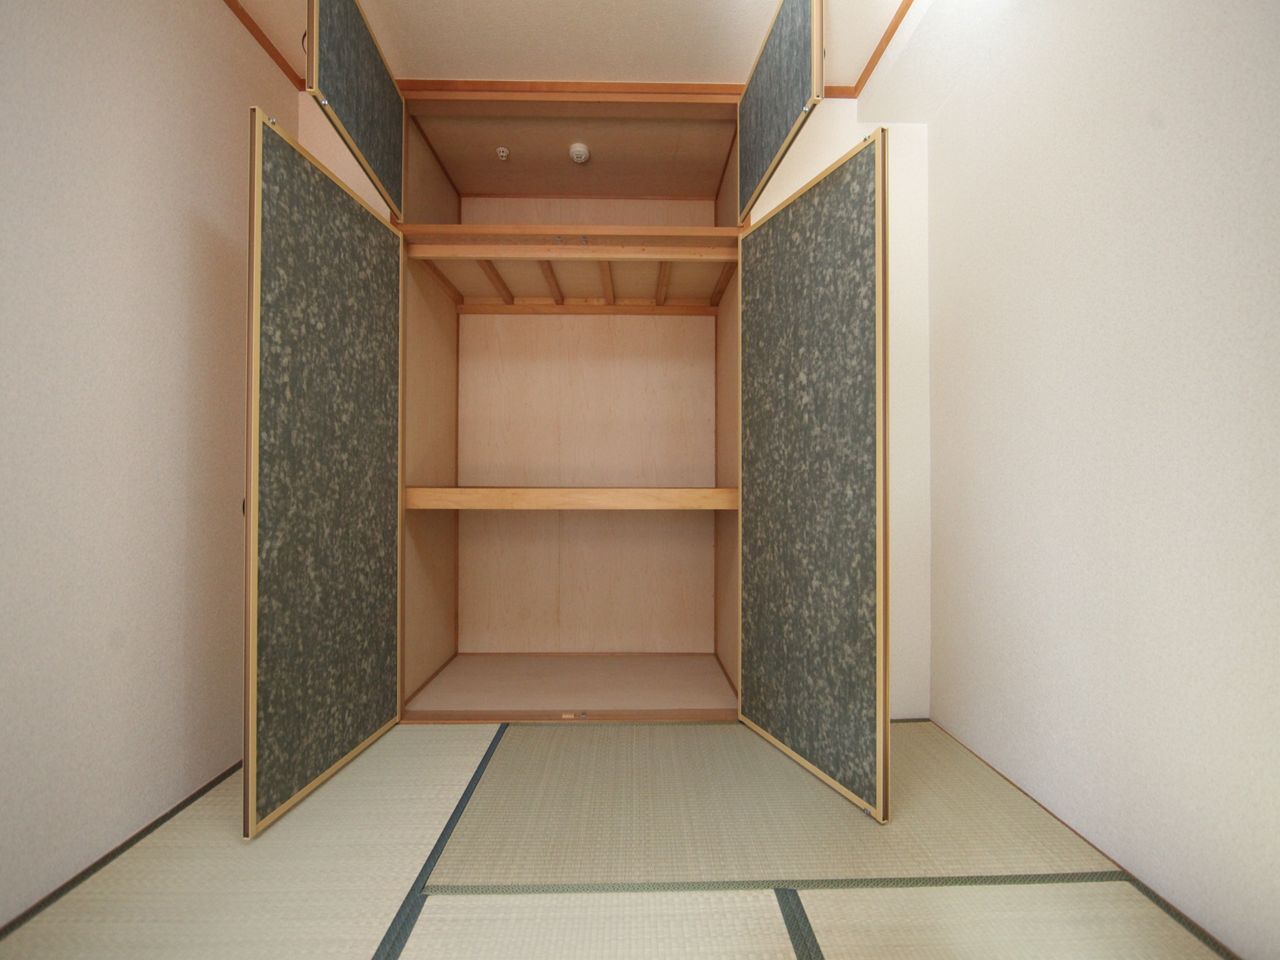 Other room space. Japanese-style room 4.5 Pledge Furniture appliances (refrigerator range washing machine) will be available